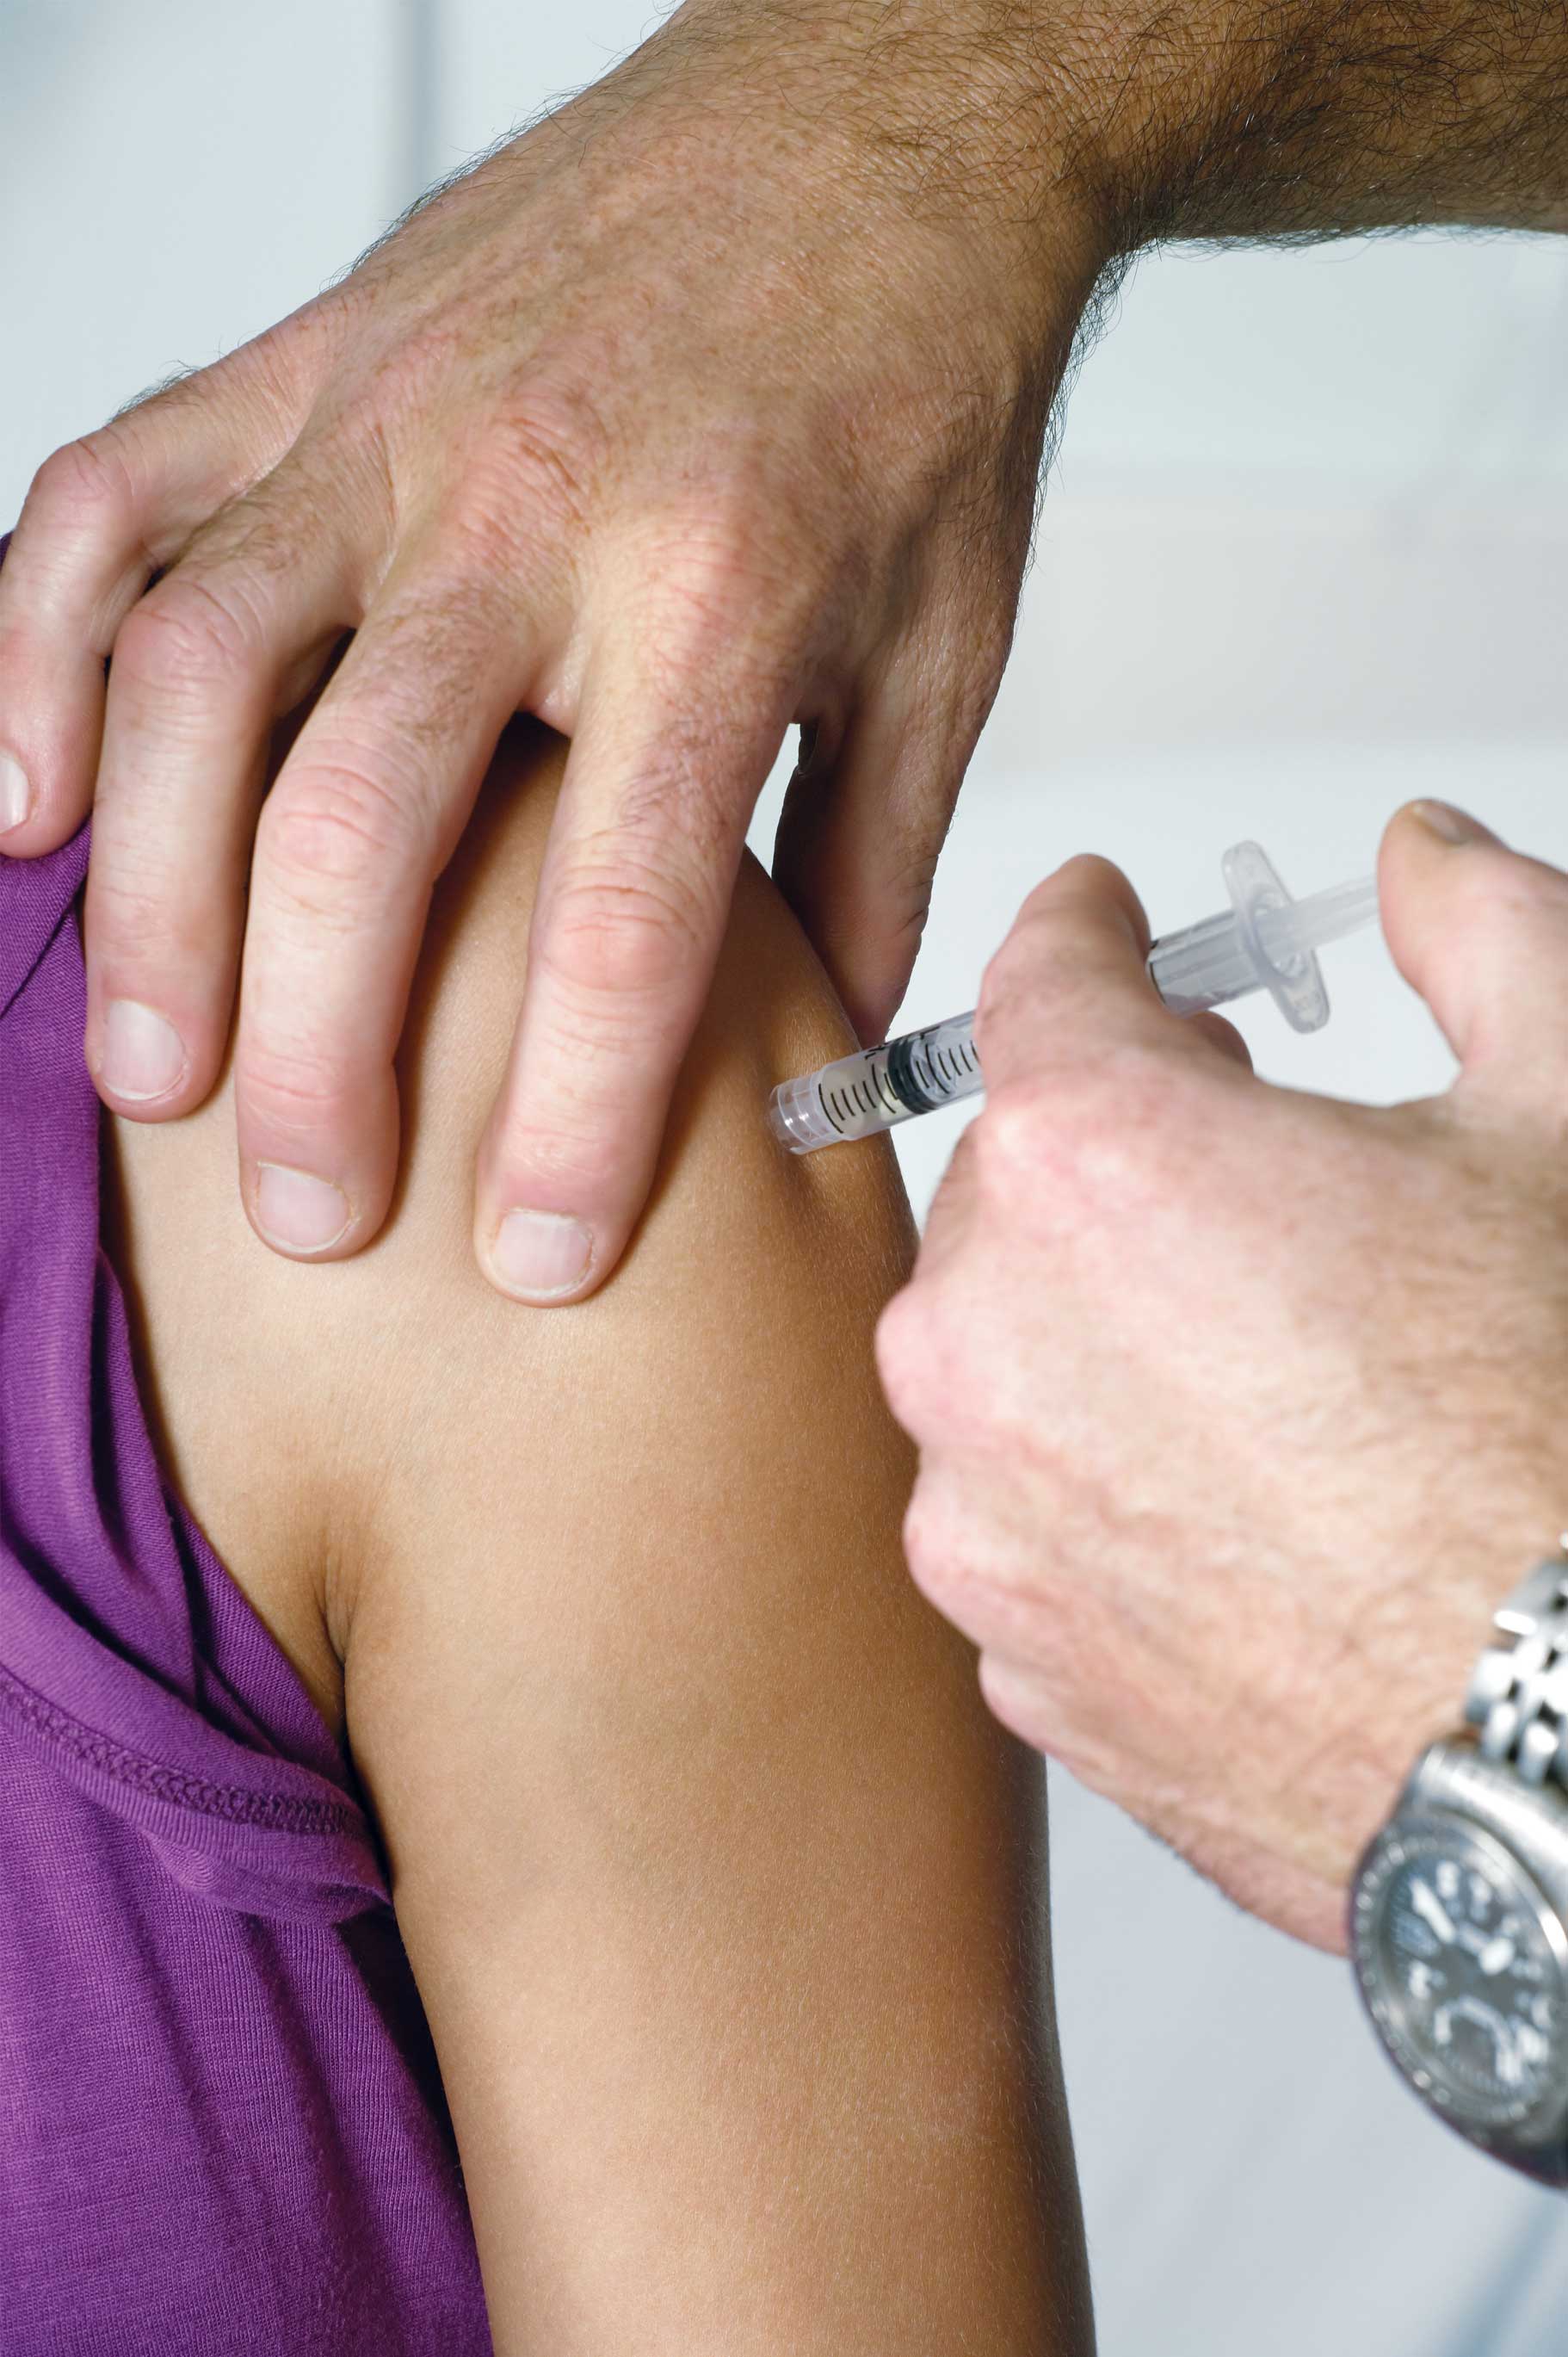 5 Reasons Why You Should Get the Flu Shot